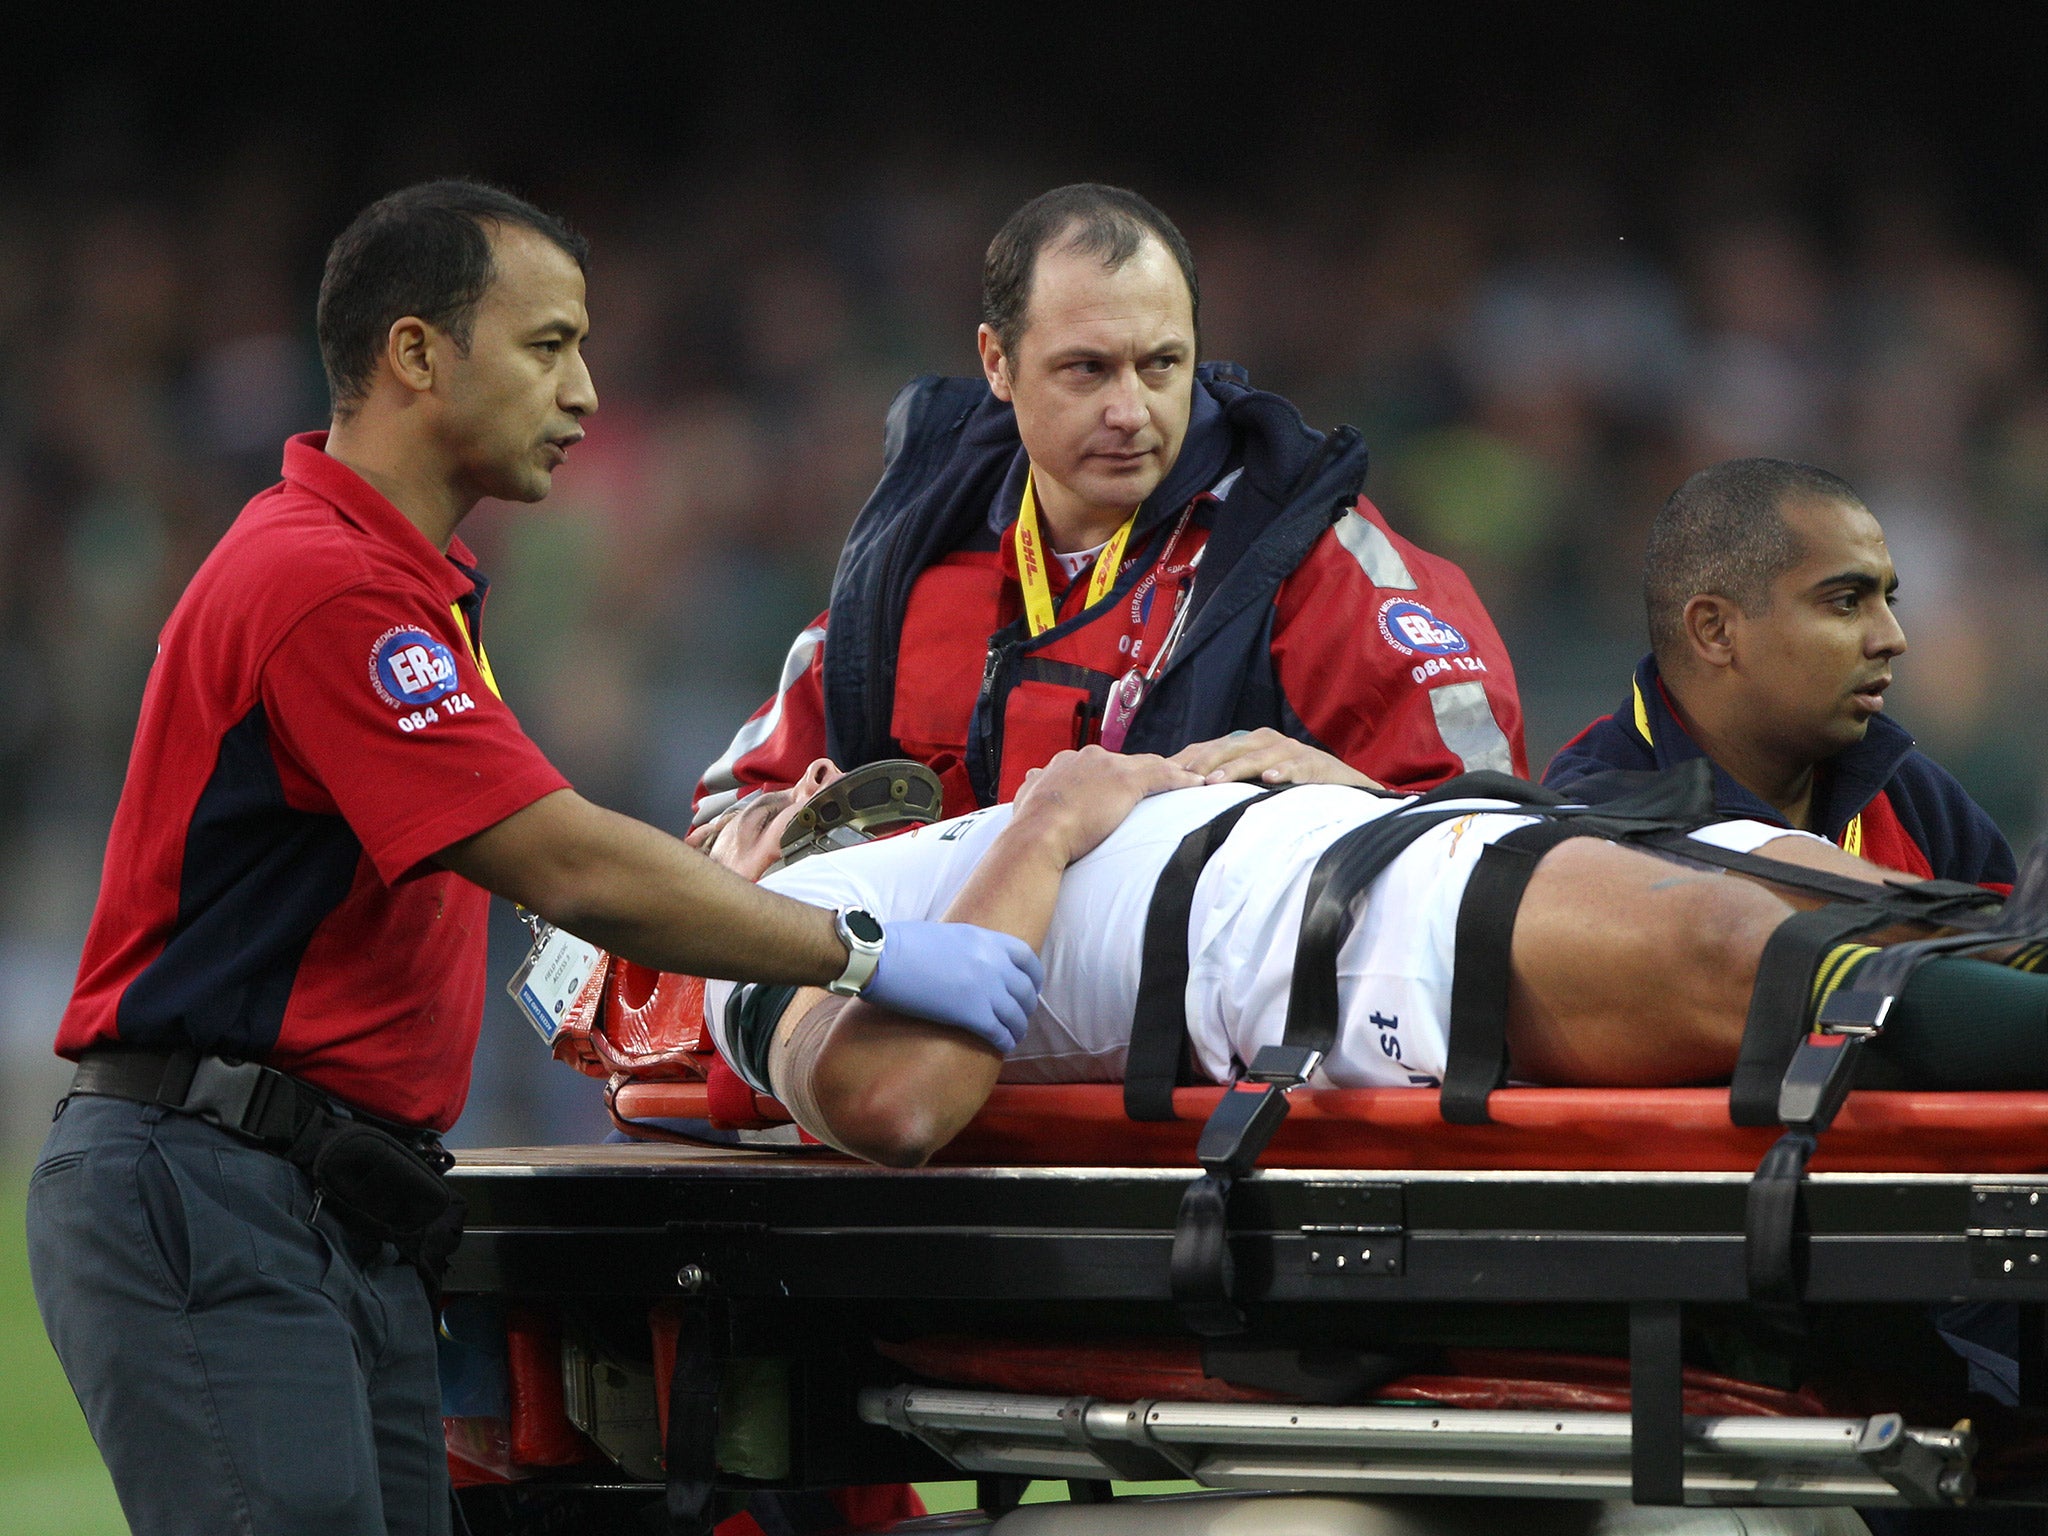 Pat Lambie is taken off the field on a stretcher